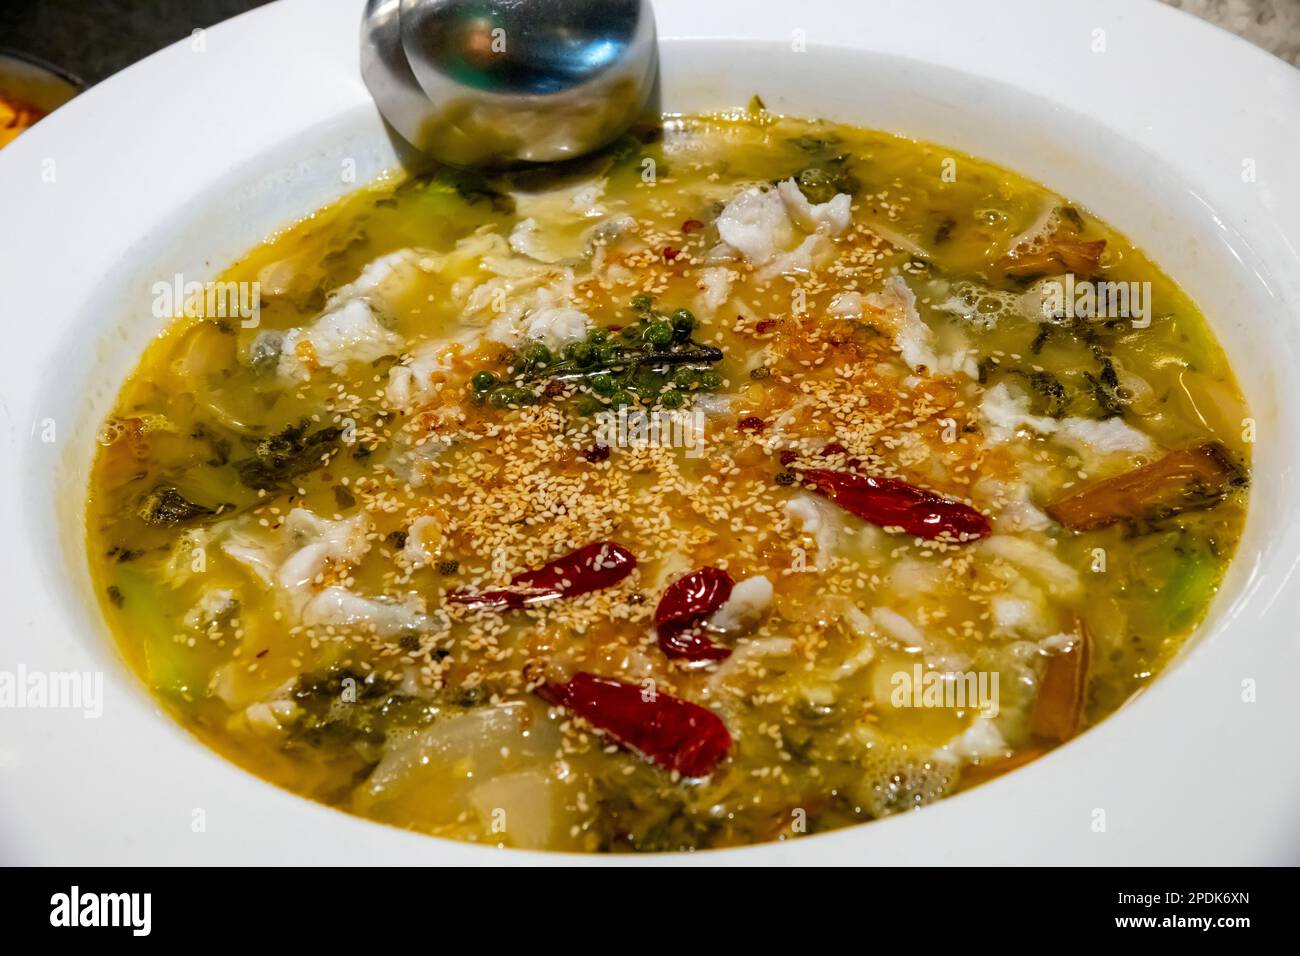 Chinese restaurant, Spicy fish stew, a popular Chinese dish from Sichuan province. Hong Kong , China. Stock Photo